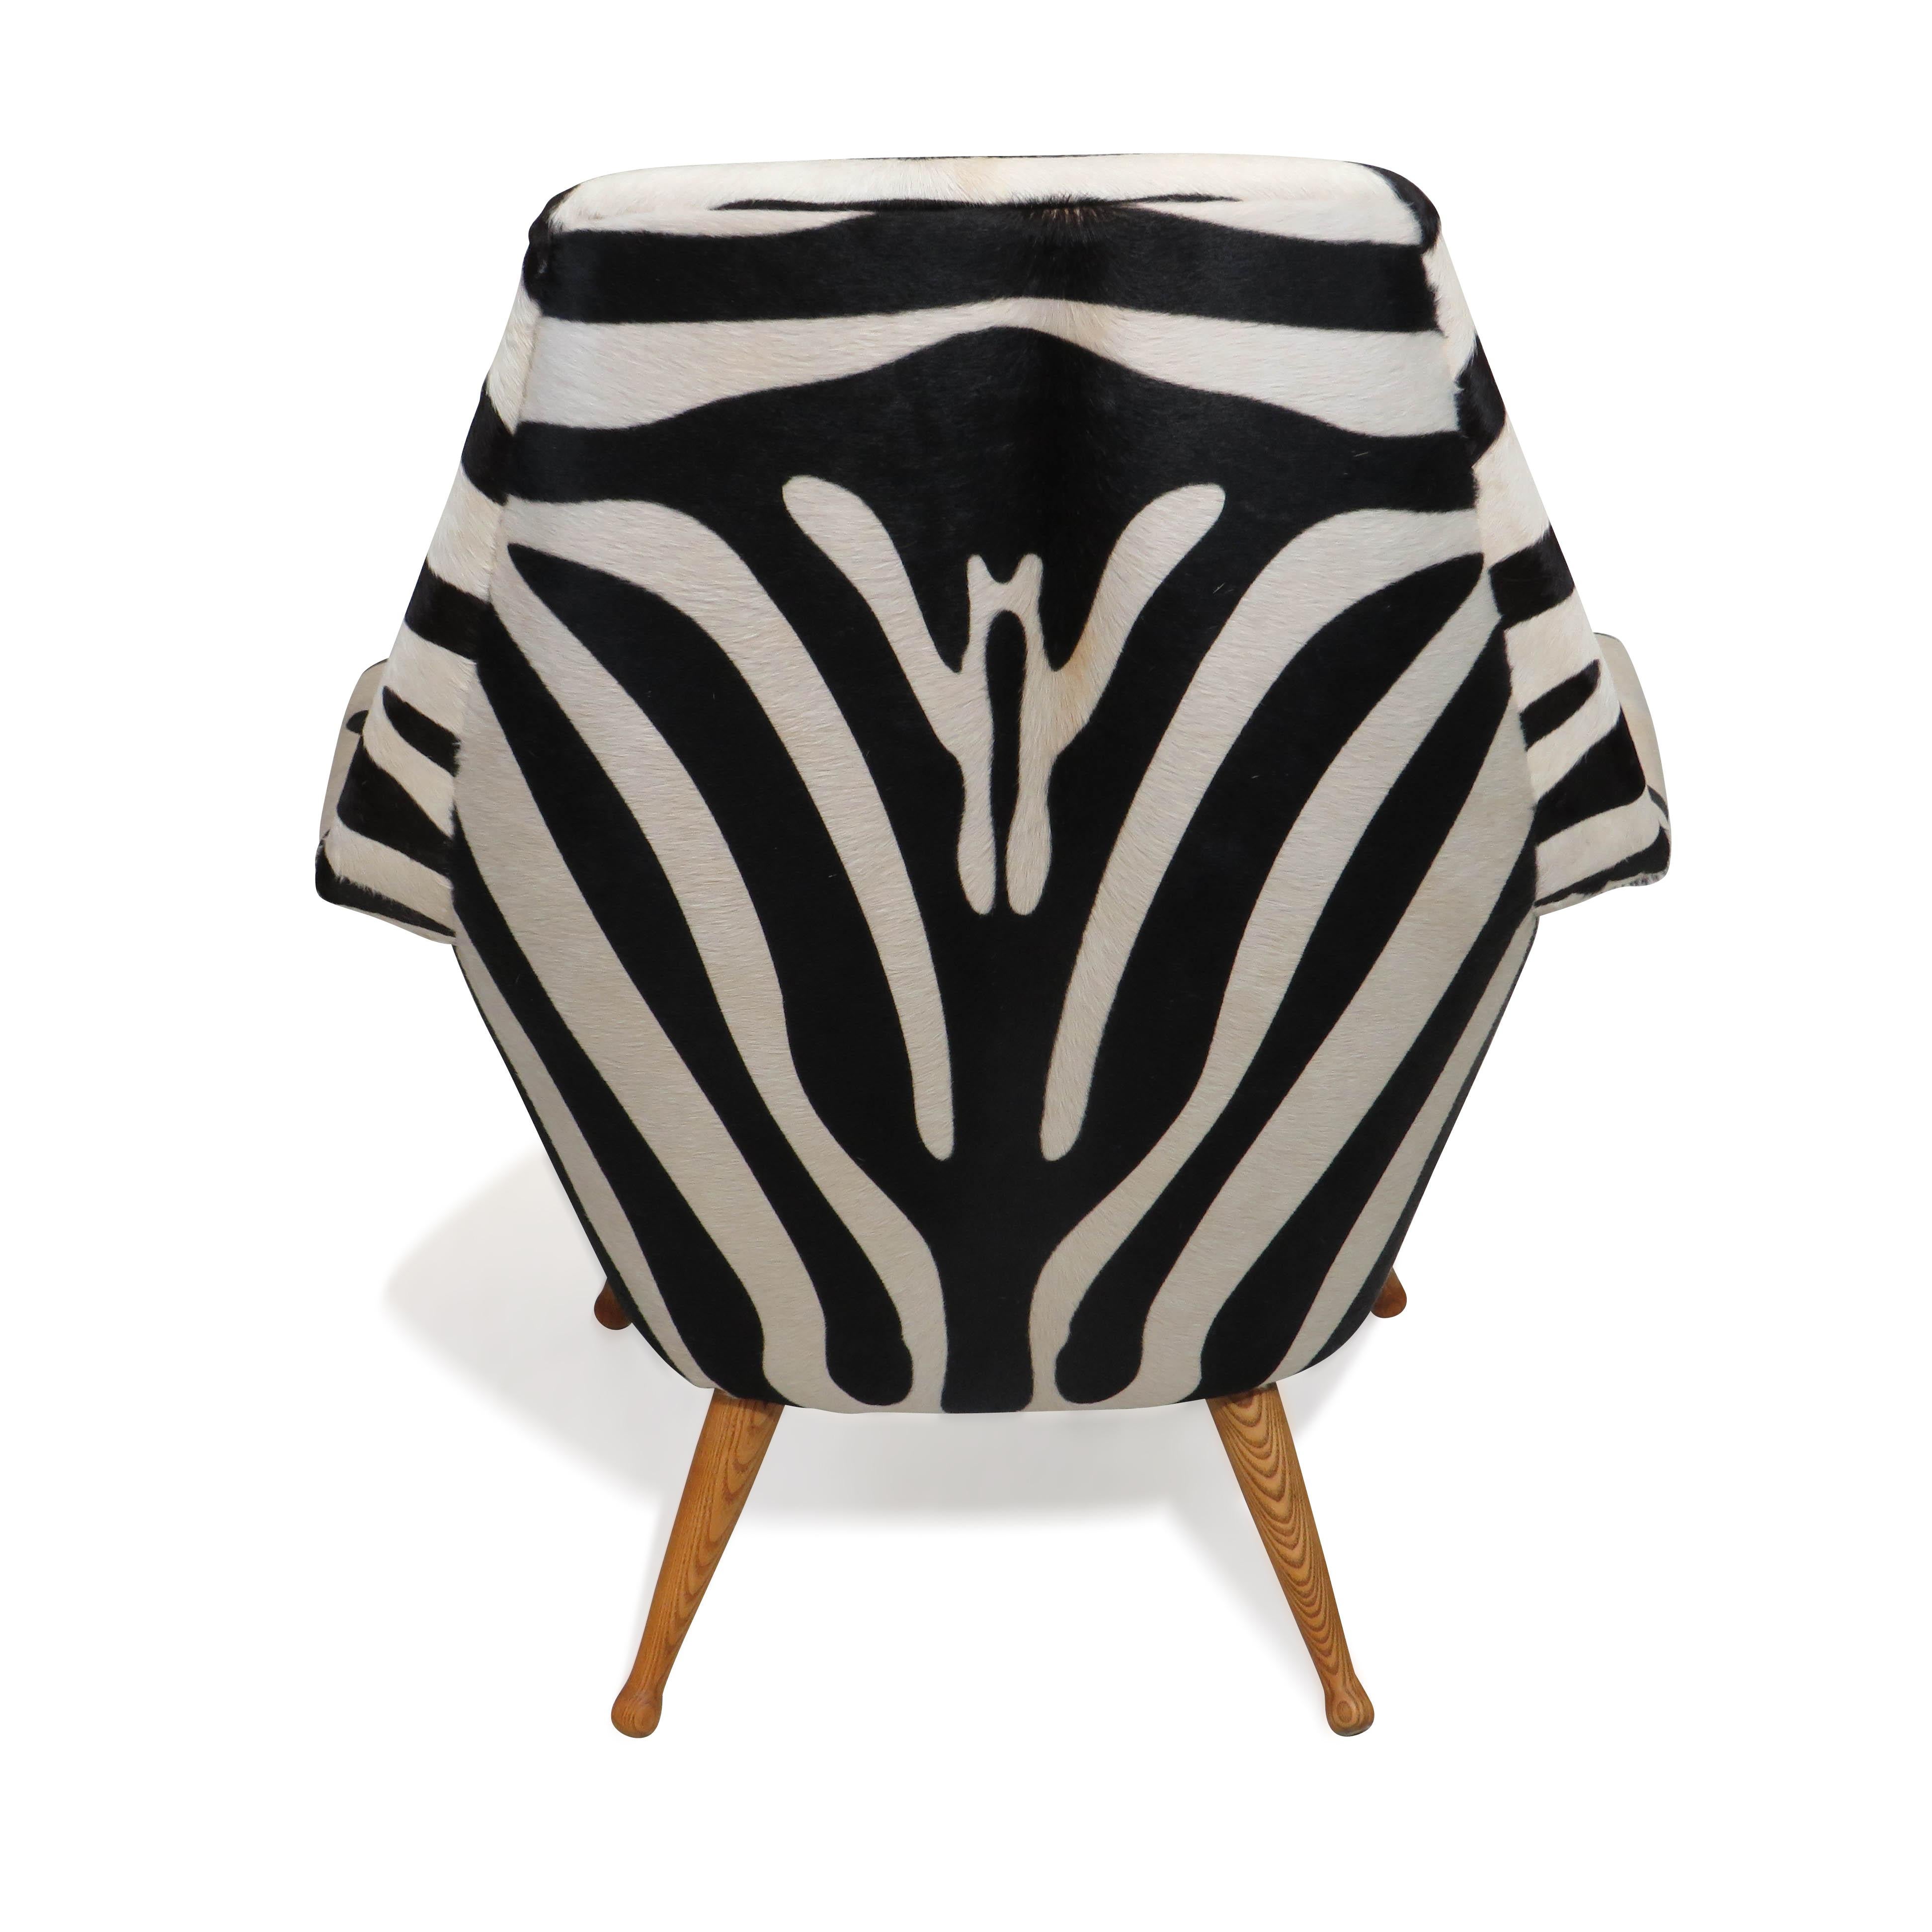 Torbjorn Afdal Danish Lounge Chair in Zebra Leather In Excellent Condition For Sale In Oakland, CA